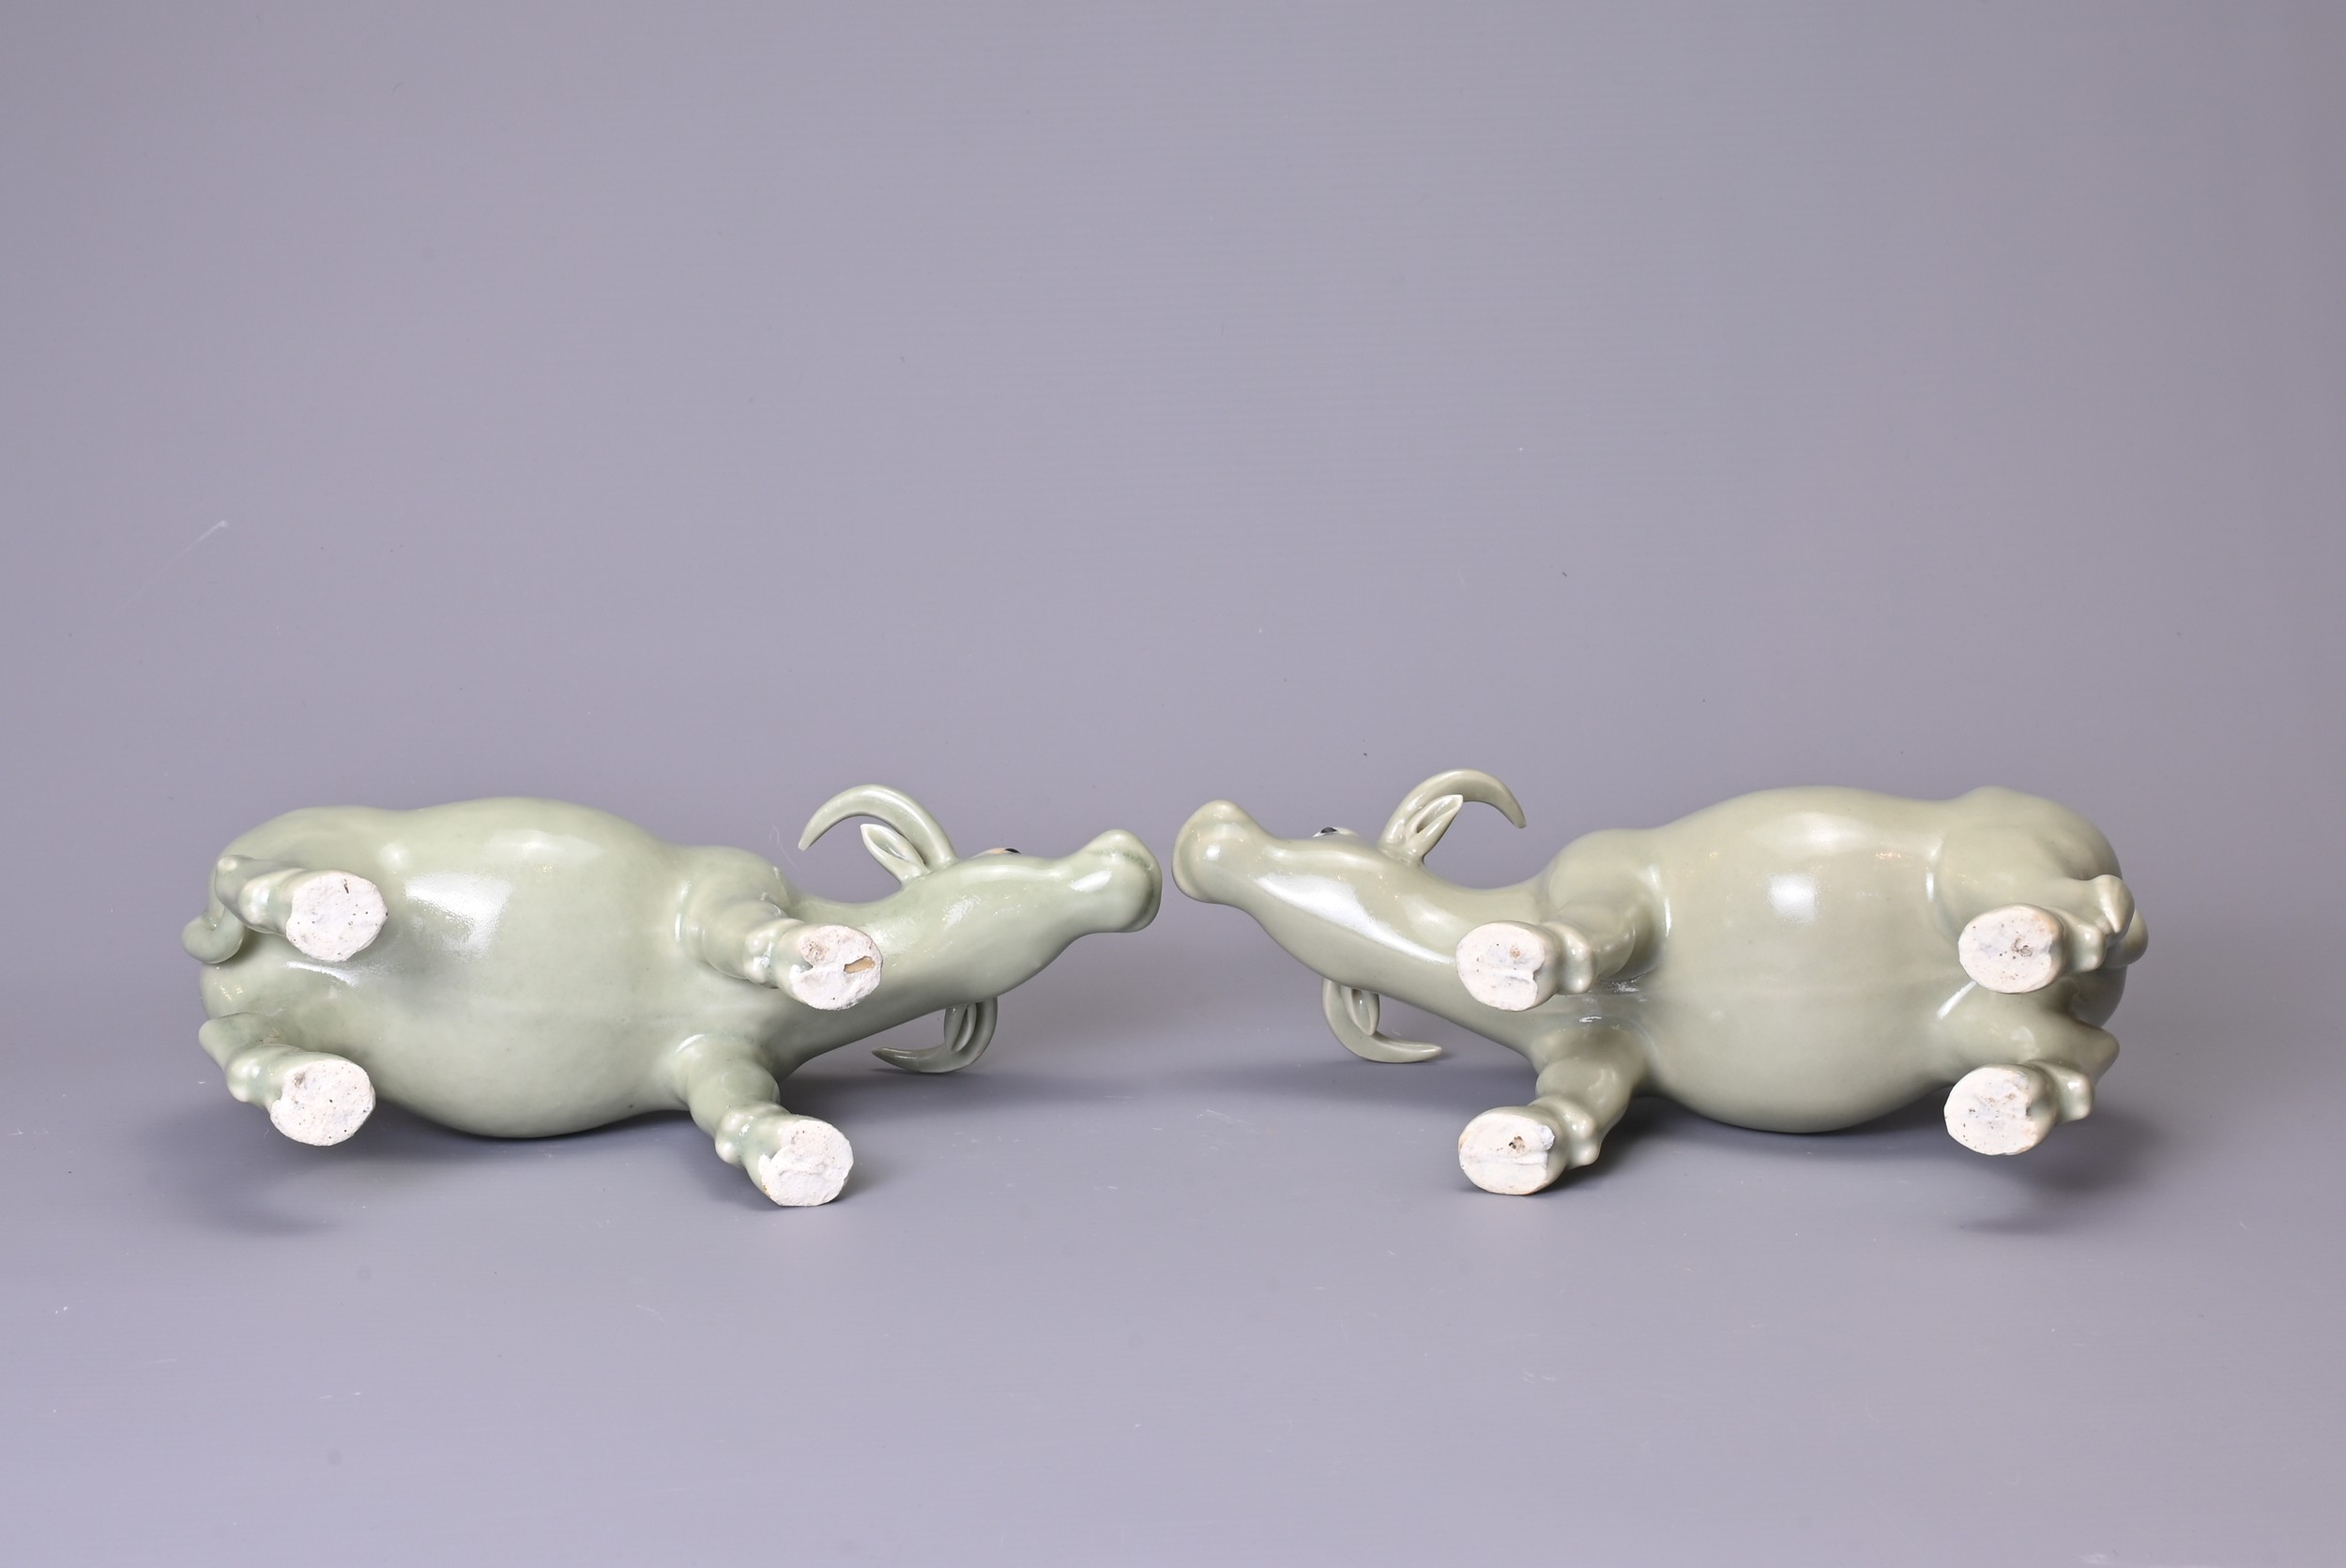 A PAIR OF CHINESE CELADON GLAZED PORCELAIN MODELS OF OX, 20th Century, approx. 21 cm long (2) - Image 5 of 5